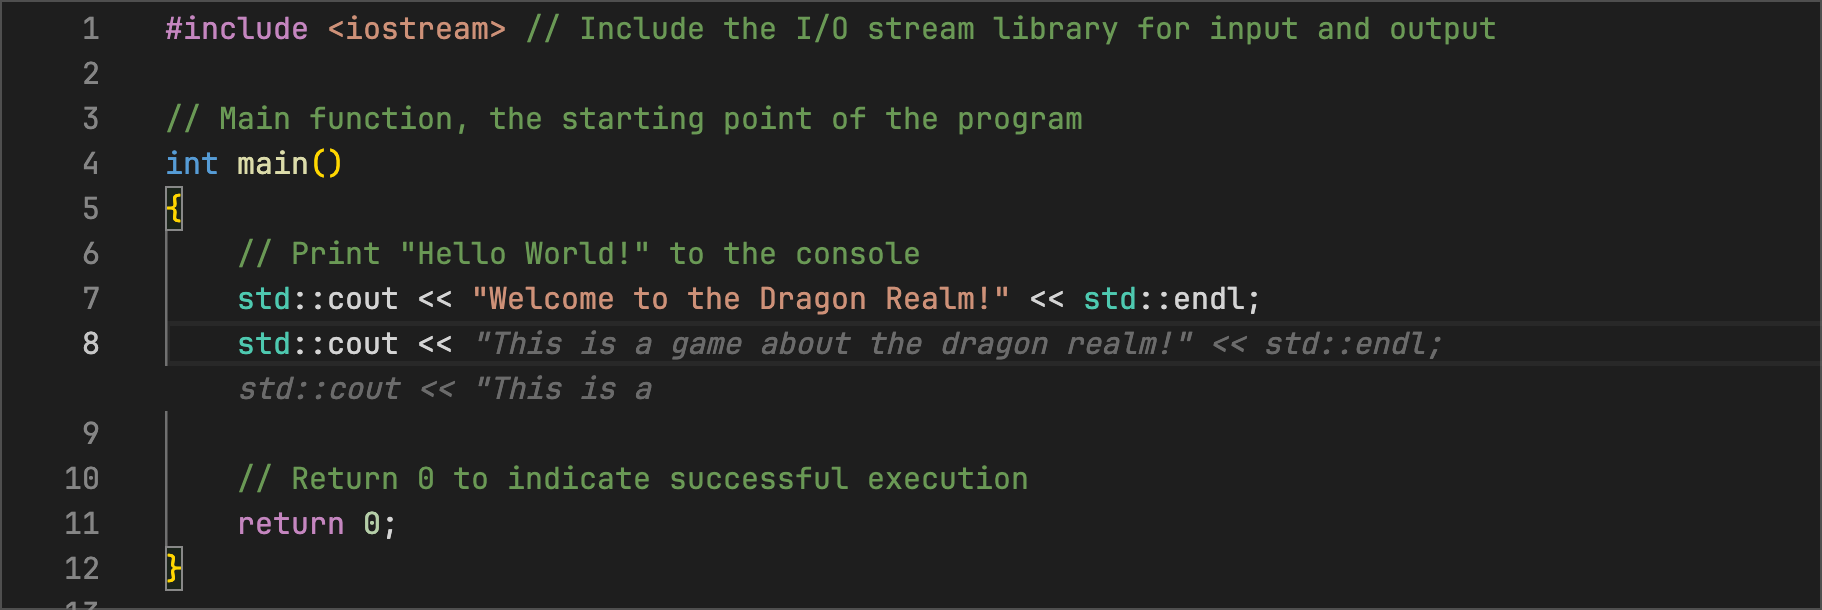 adventure.cpp - Code Suggestions offers suggestion of welcoming users to the Dragon Realm and knows its a game